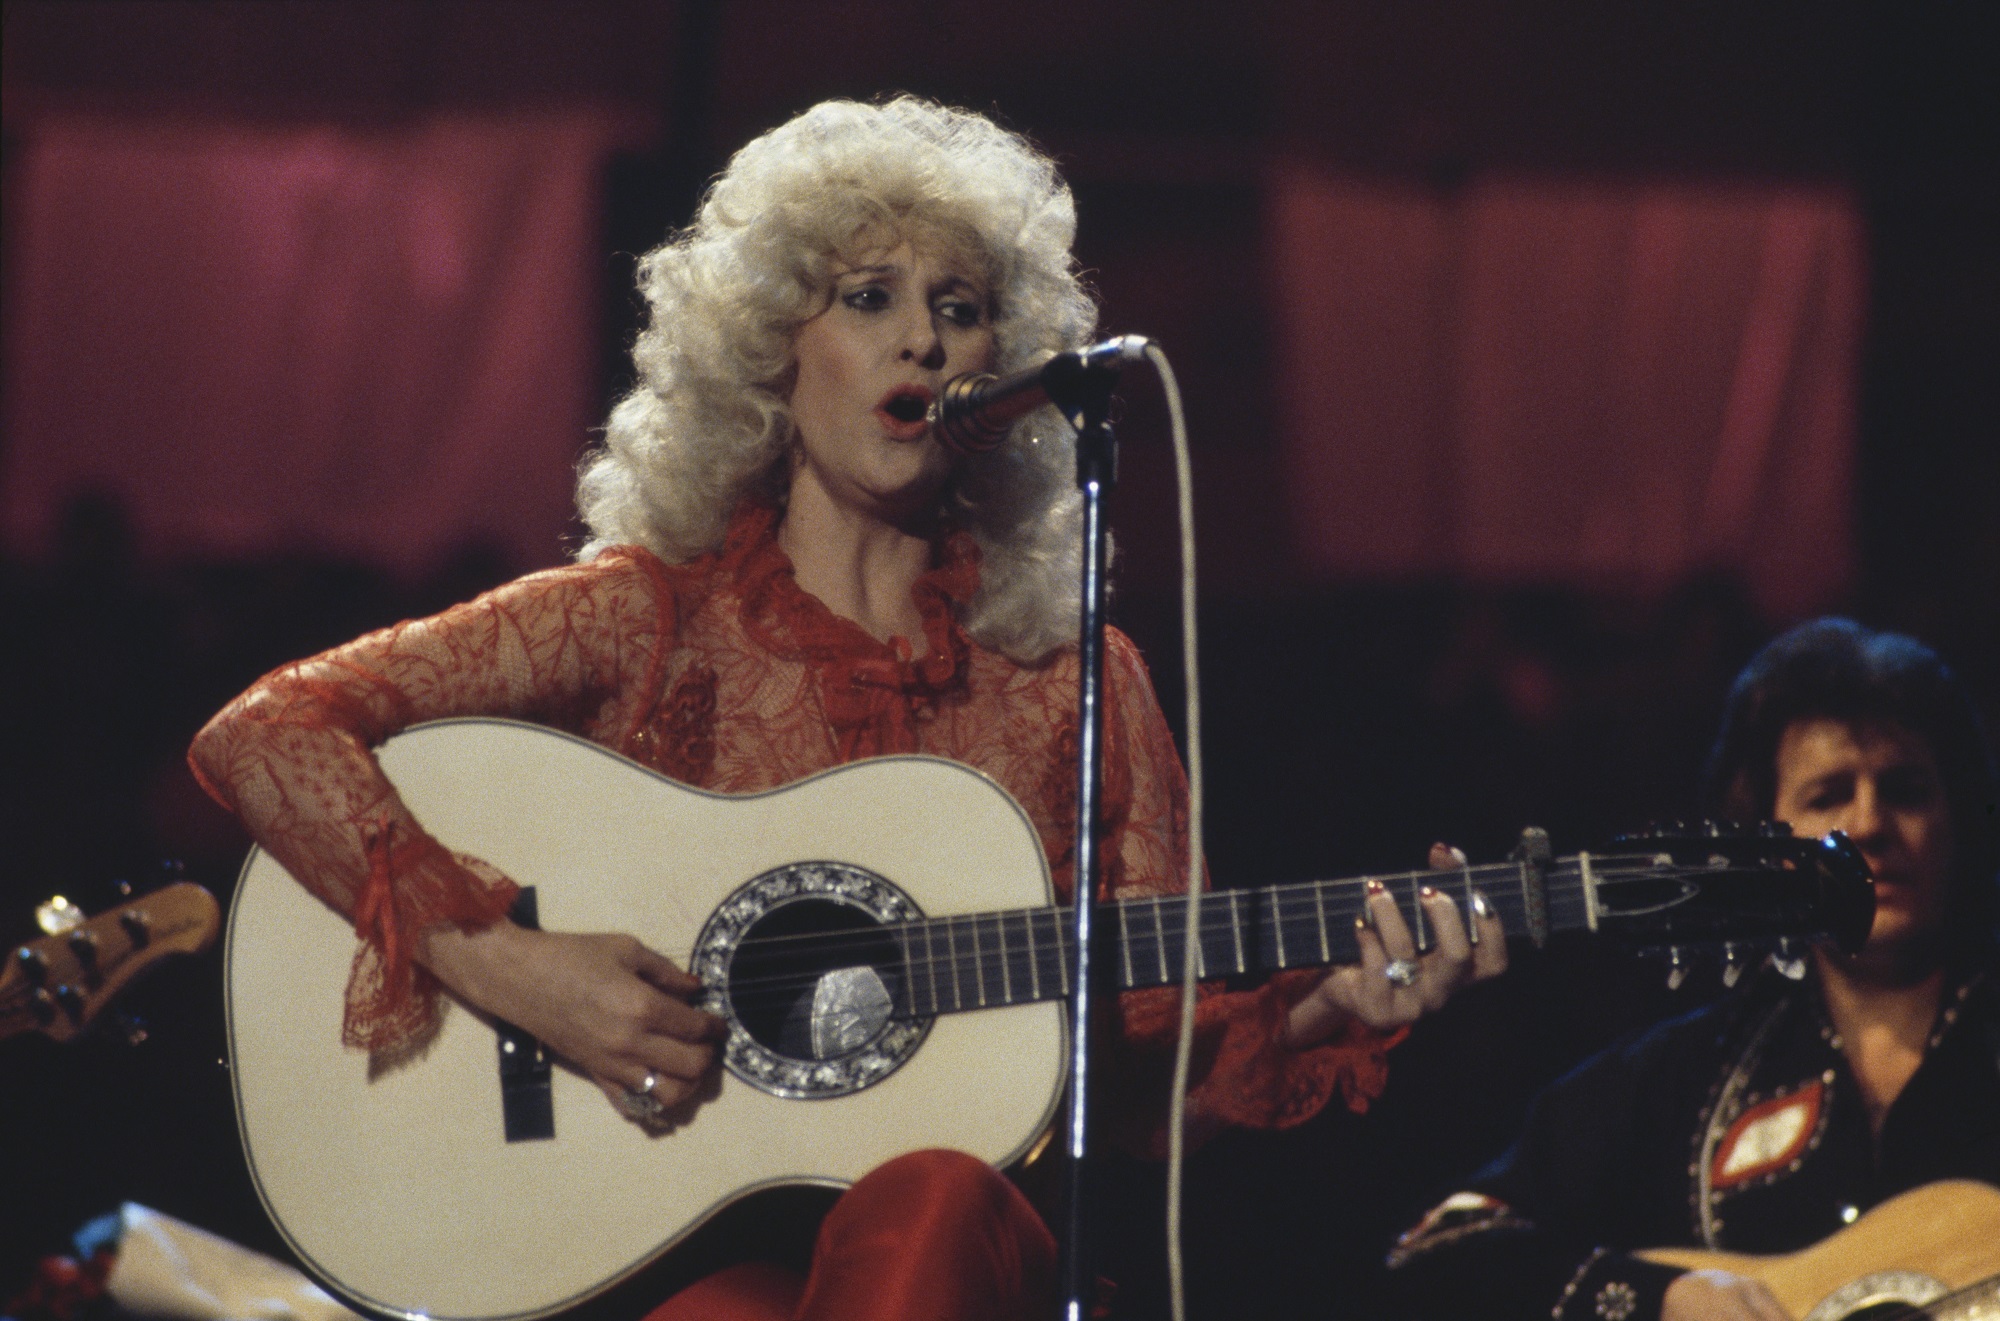 Tammy Wynette sings into a microphone while playing guitar